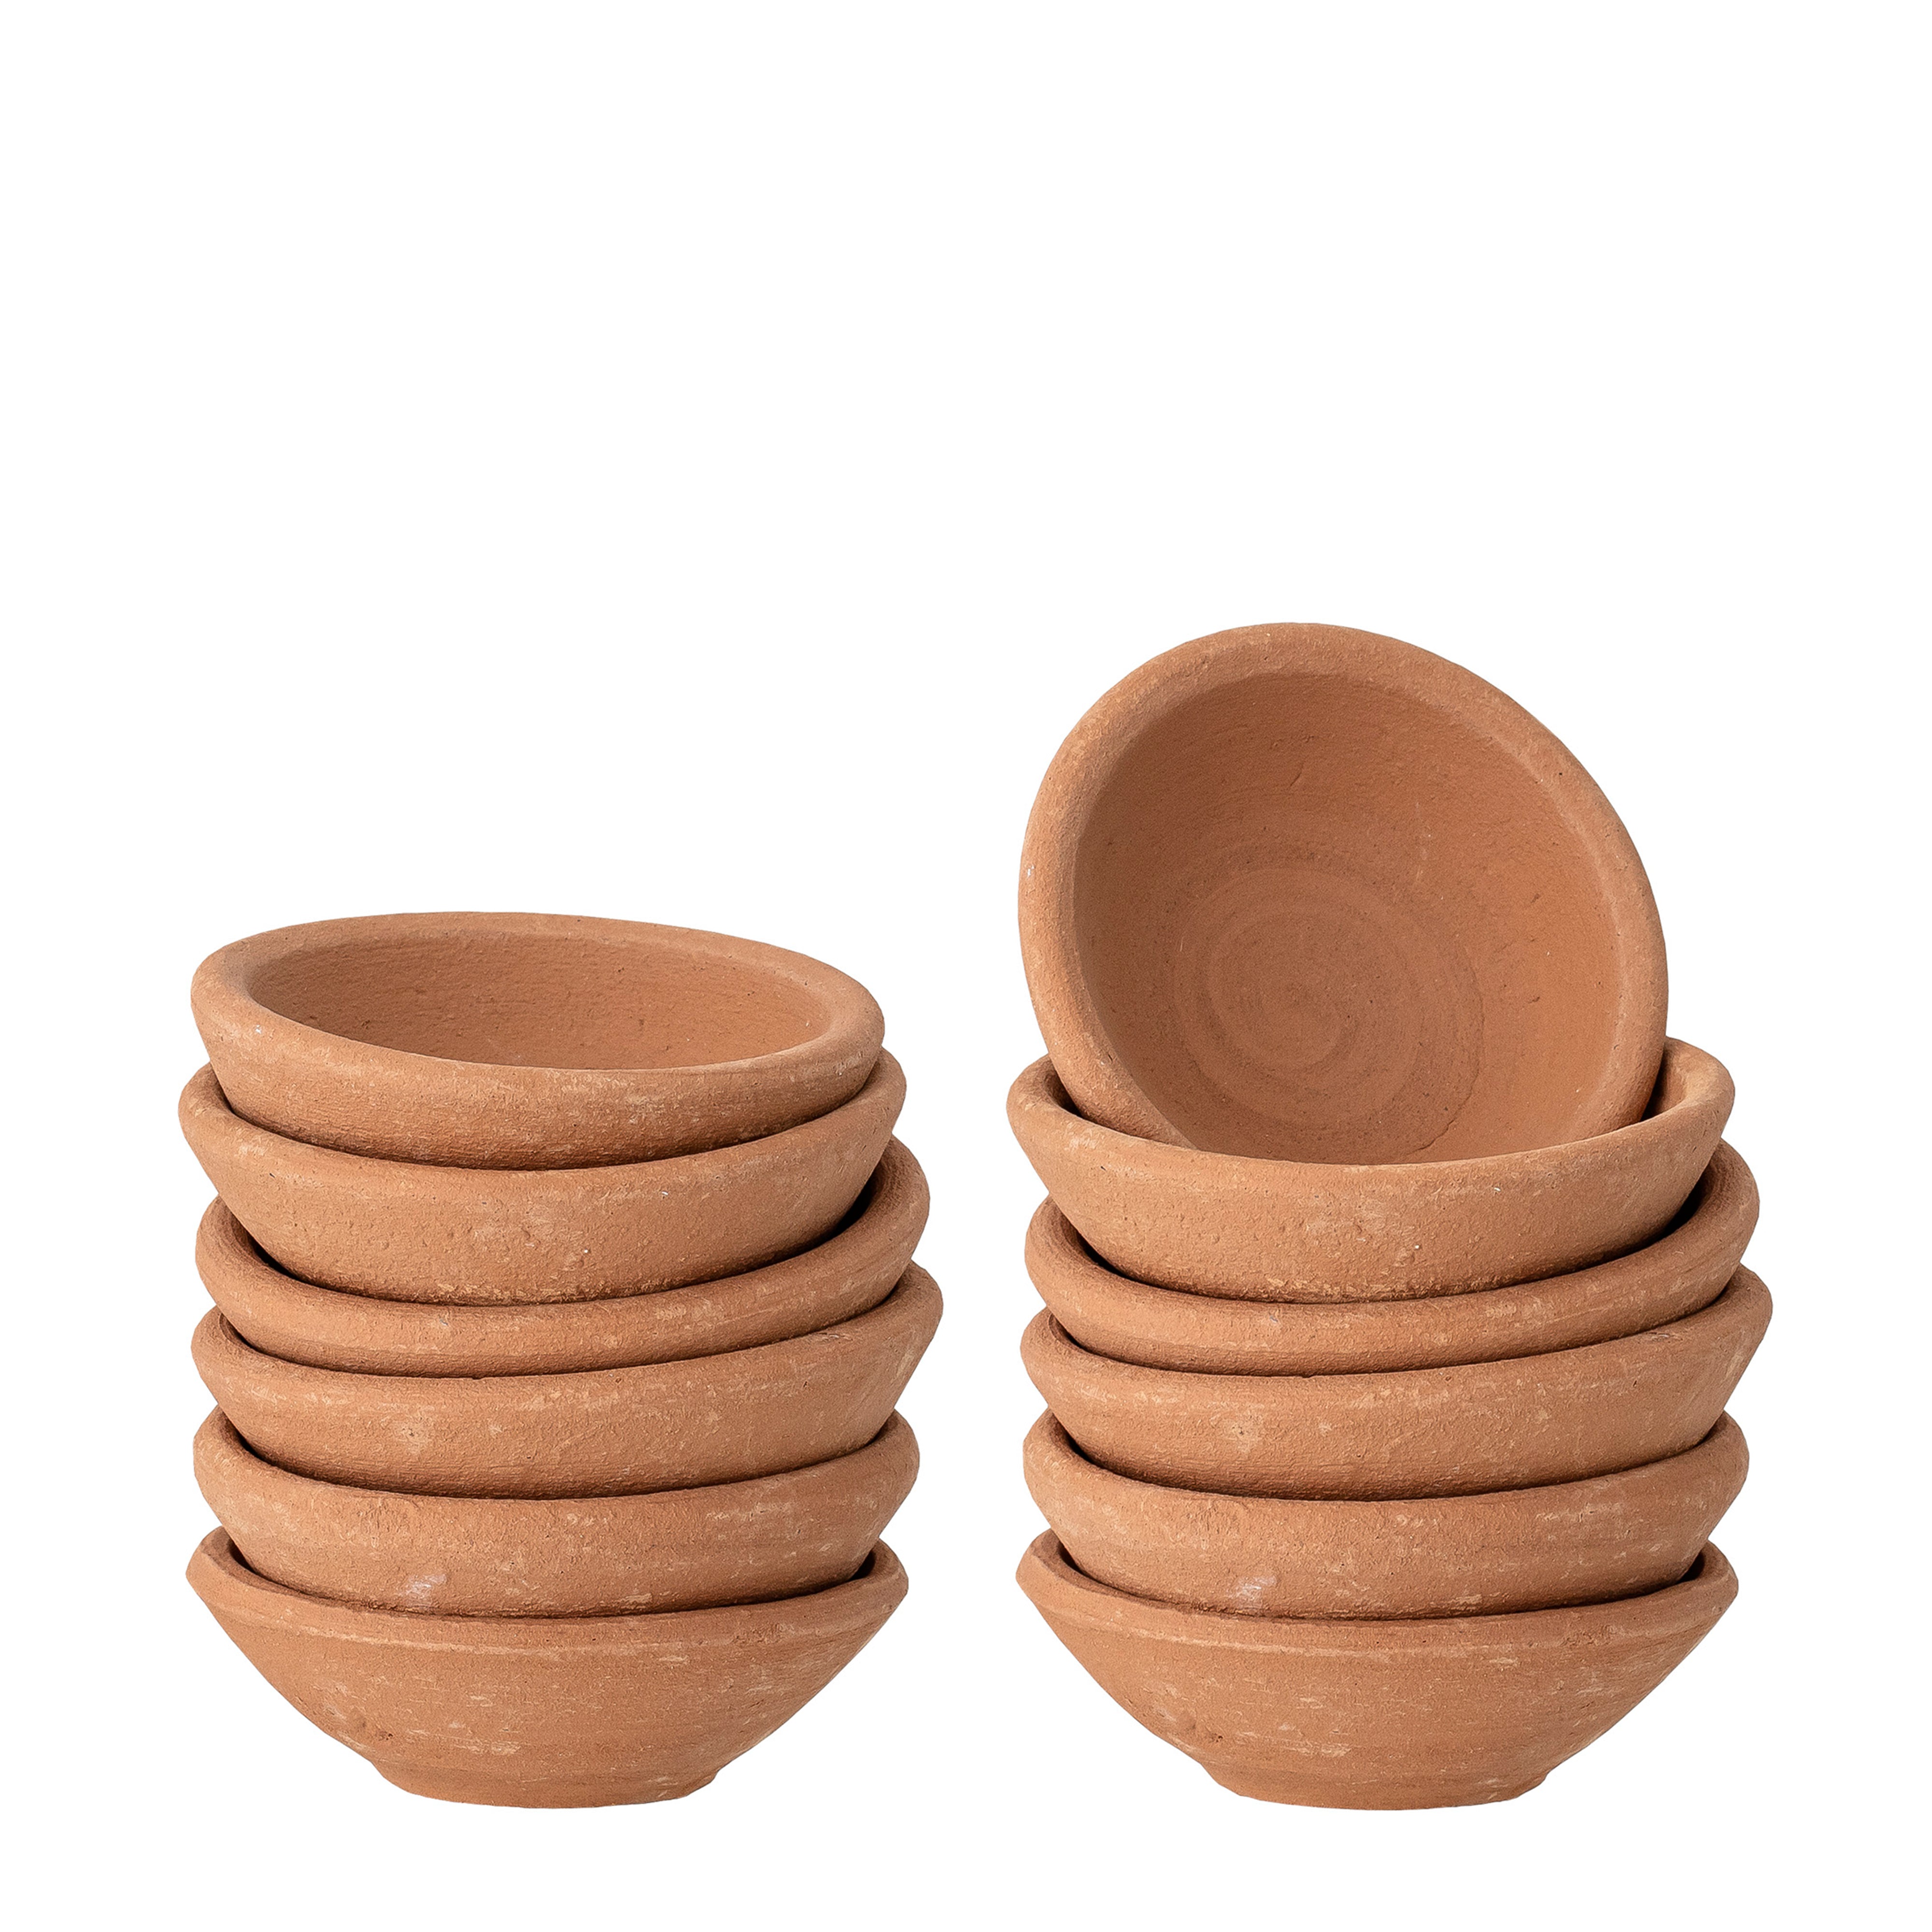 SET OF 12 SMALL TERRACOTTA BOWLS